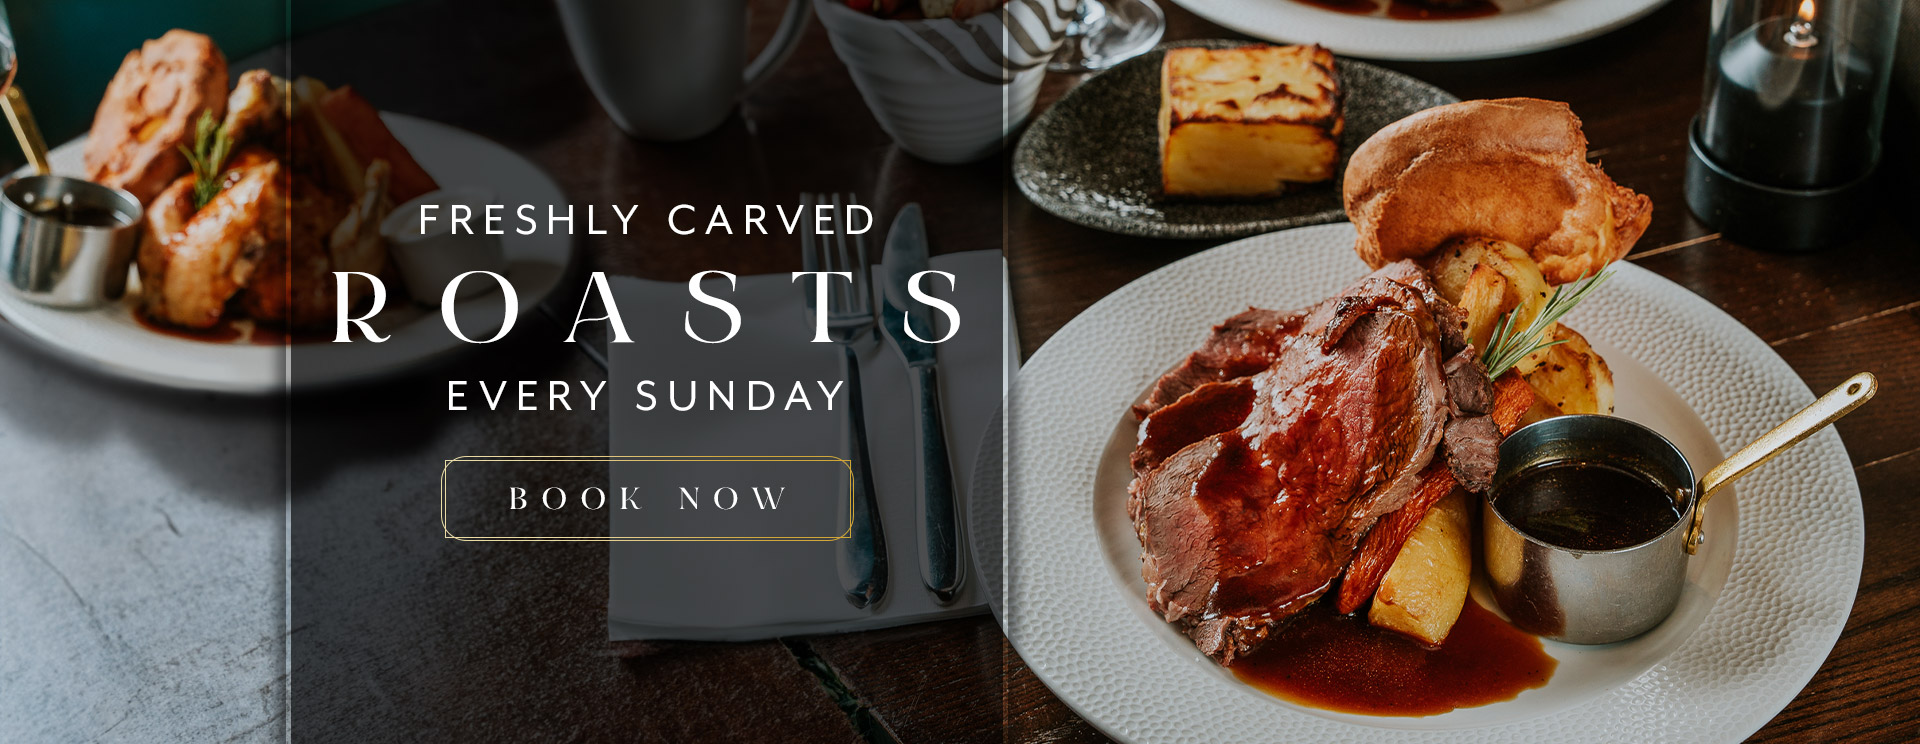 Sunday Lunch at The George & Dragon